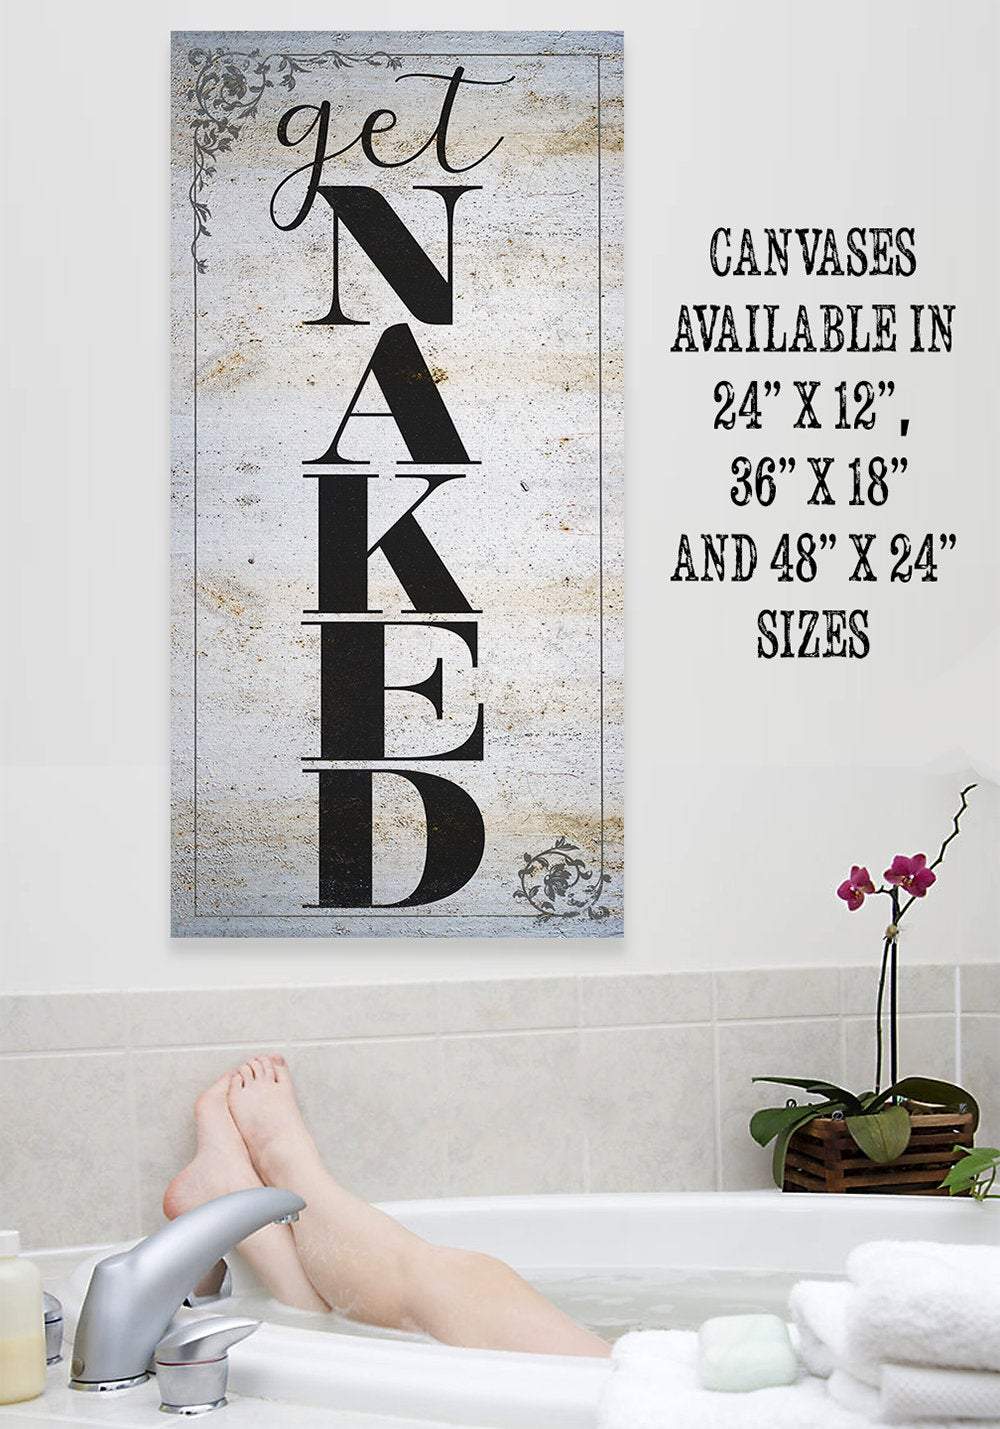 Get Naked - Canvas | Lone Star Art.